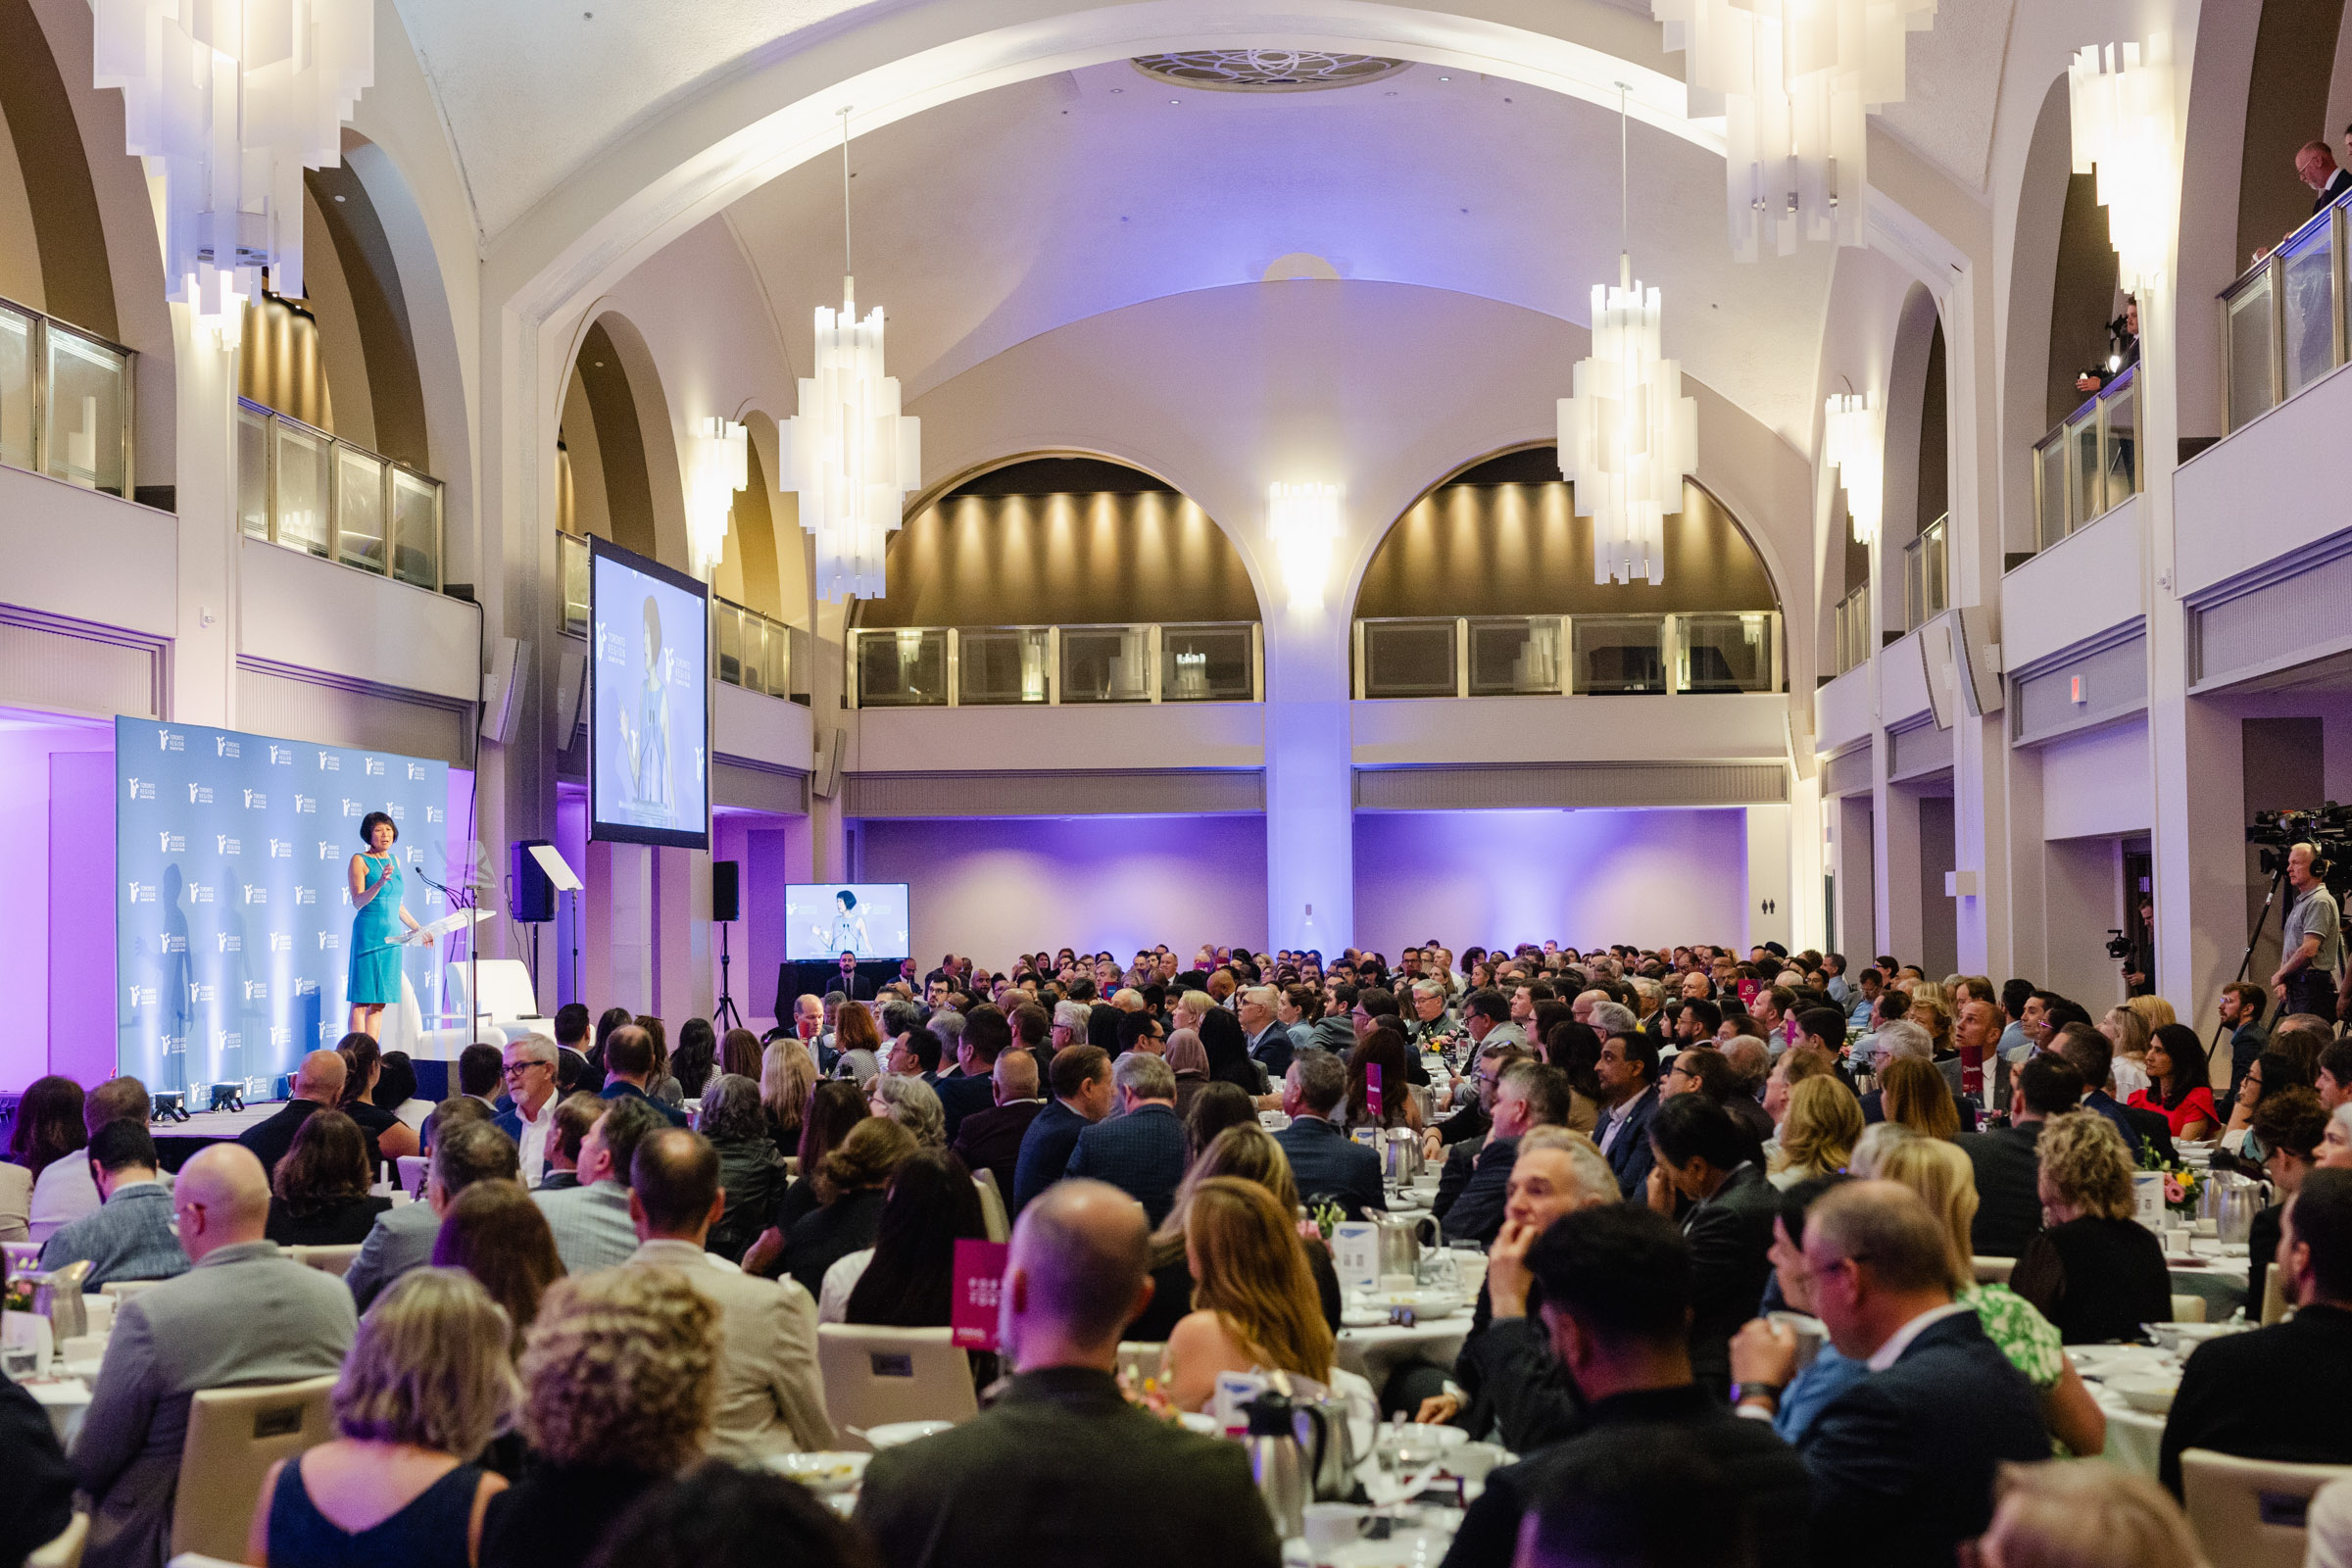 A large audience sits at tables in an elegant hall, attentively watching a speaker on stage beside a presentation screen. The room features high, arched ceilings and modern chandeliers, capturing the perfect setting for event photography.